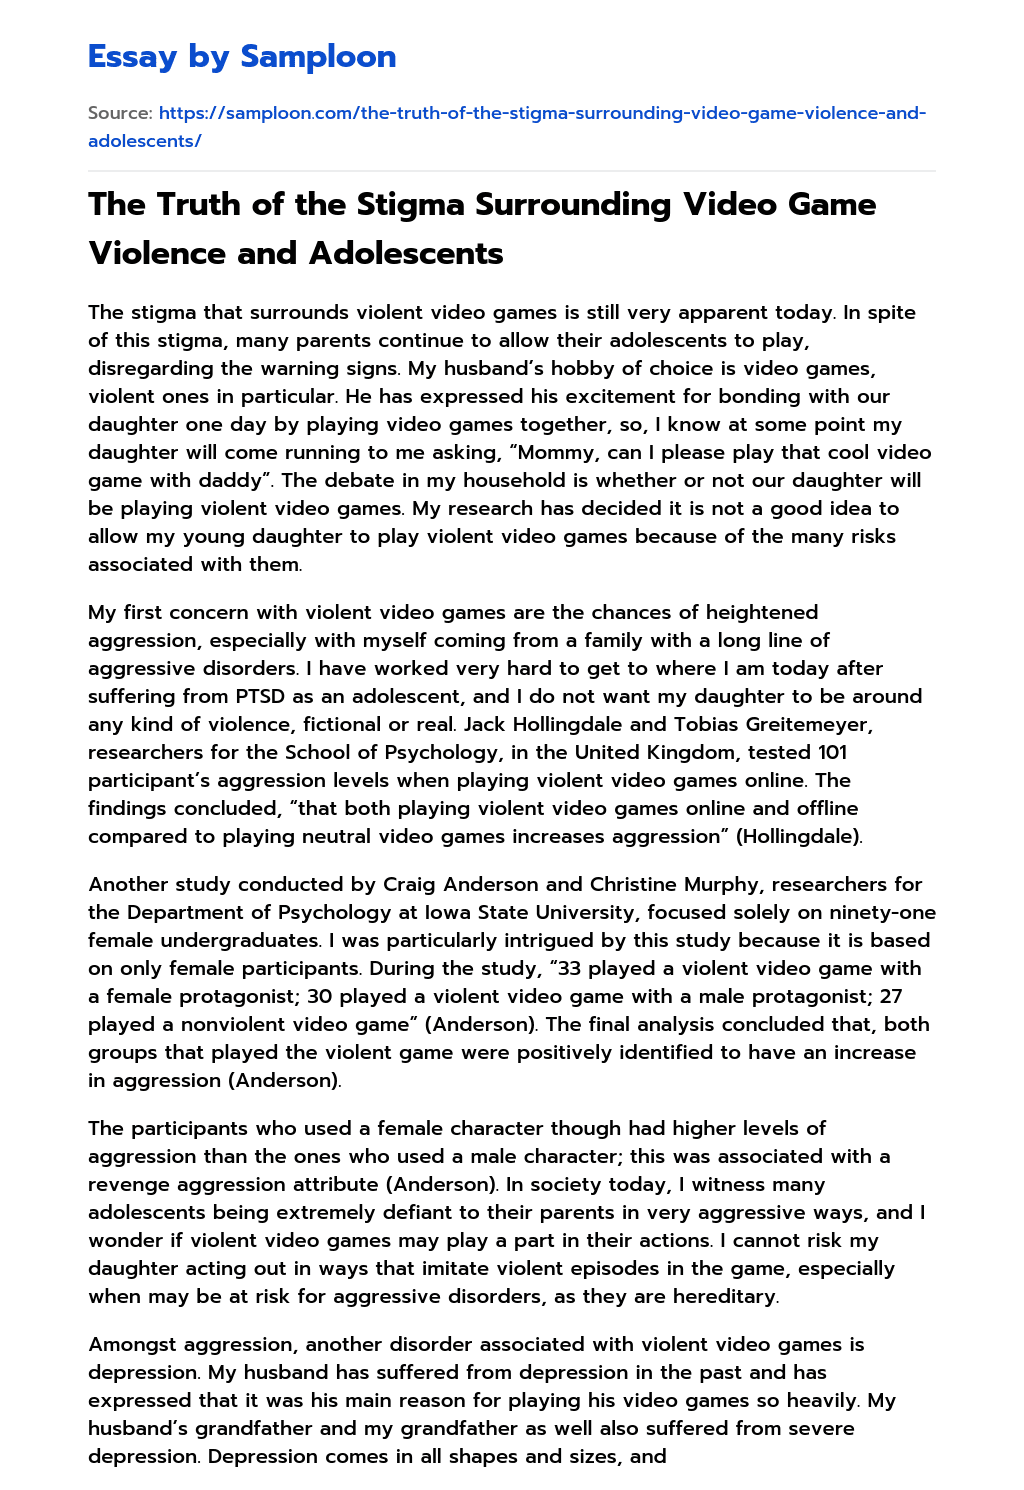 The Truth of the Stigma Surrounding Video Game Violence and Adolescents essay